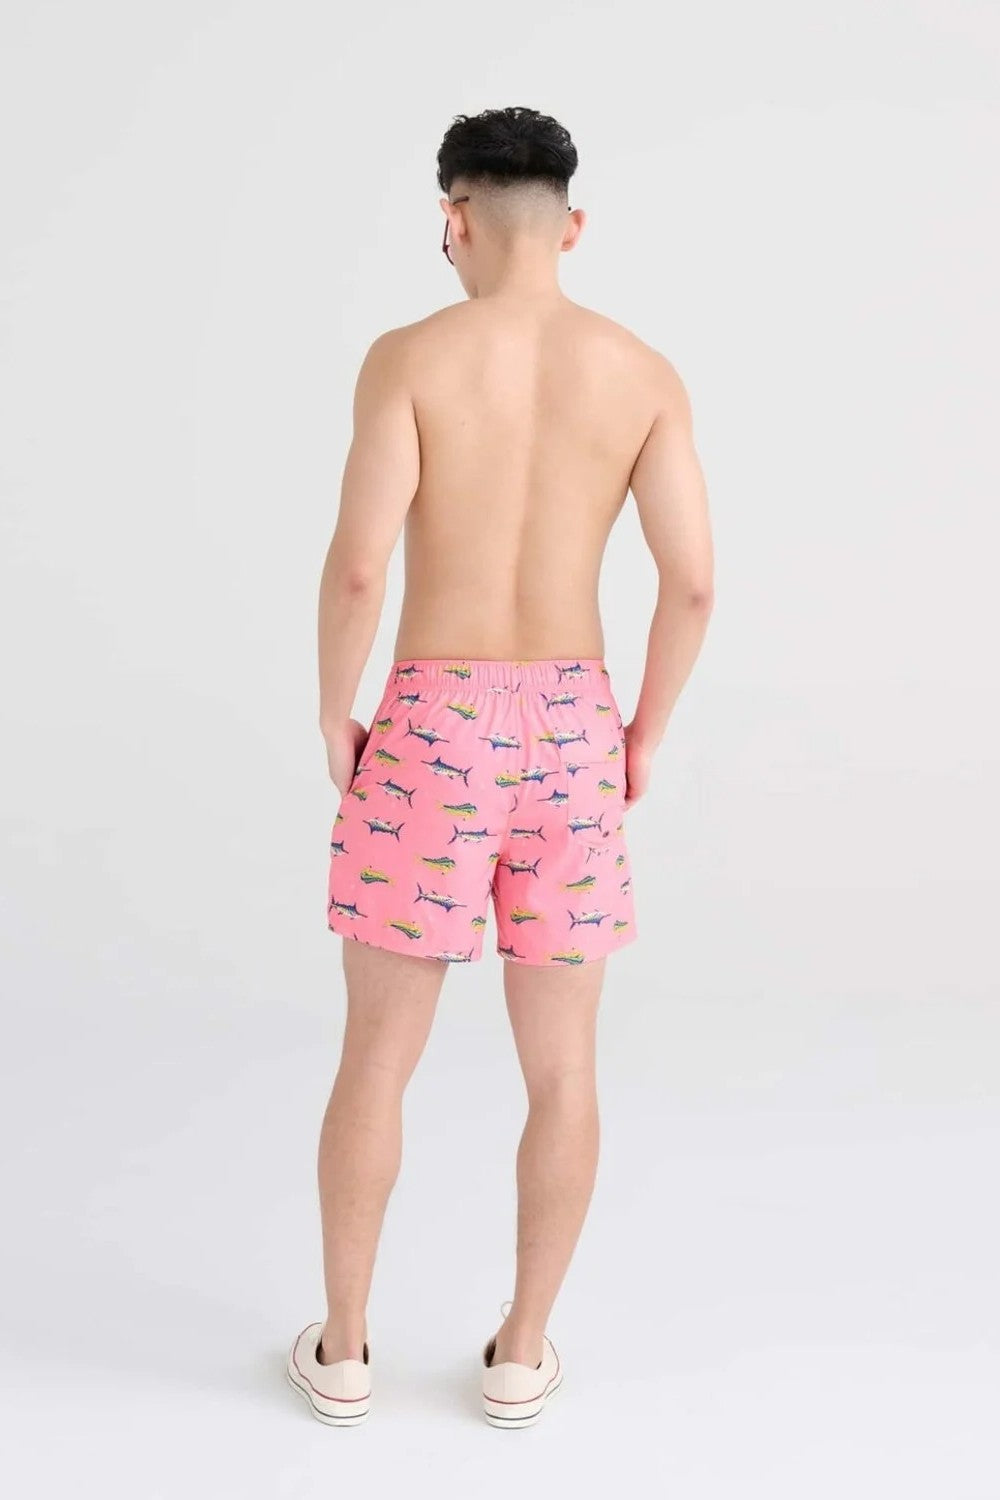 These 2N1 swim shorts combine a Slim Fit liner over a fixed-waist shell. The integrated liner is form-fitting through the butt and thighs.  Beach bash and beyond. Featuring an ultra-light mesh liner and the BallPark Pouch, Oh Buoy is primed for your next pool party. 